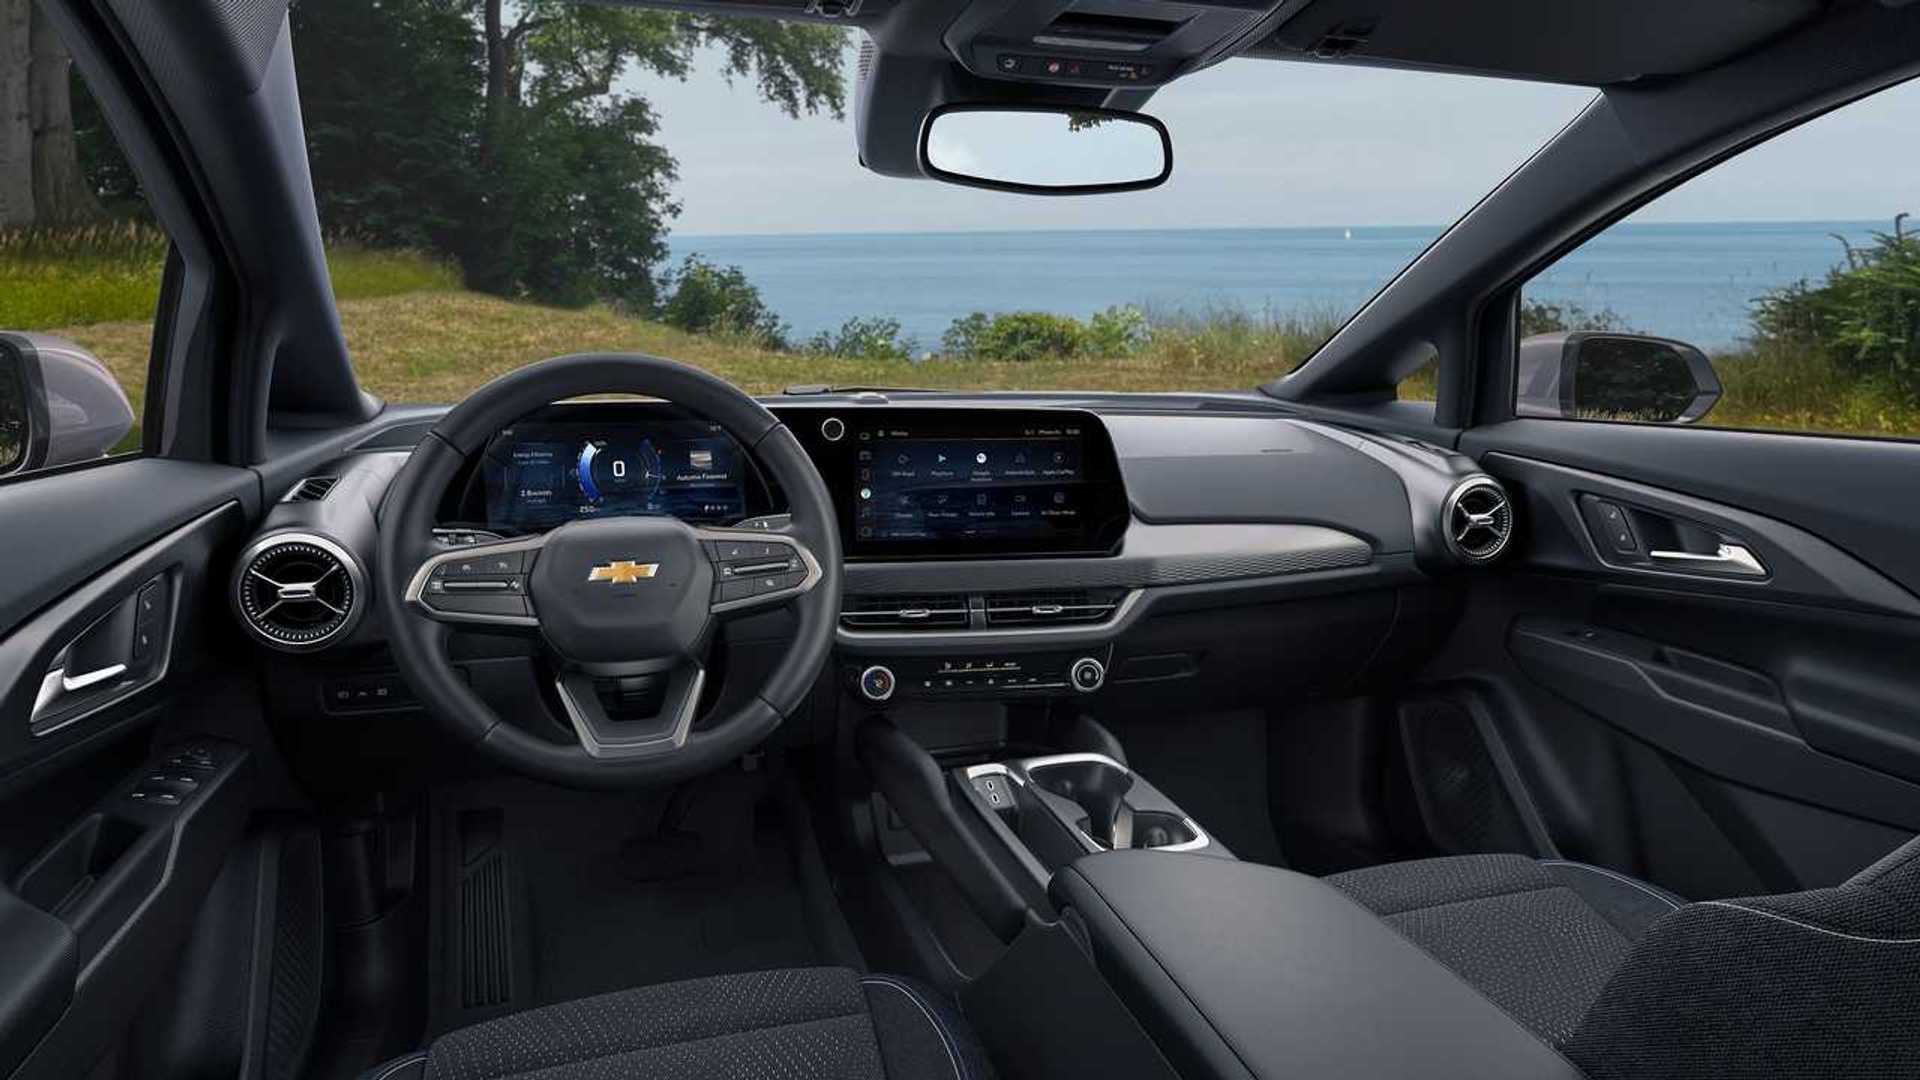 petition calls on gm to bring $30k chevrolet equinox ev to market